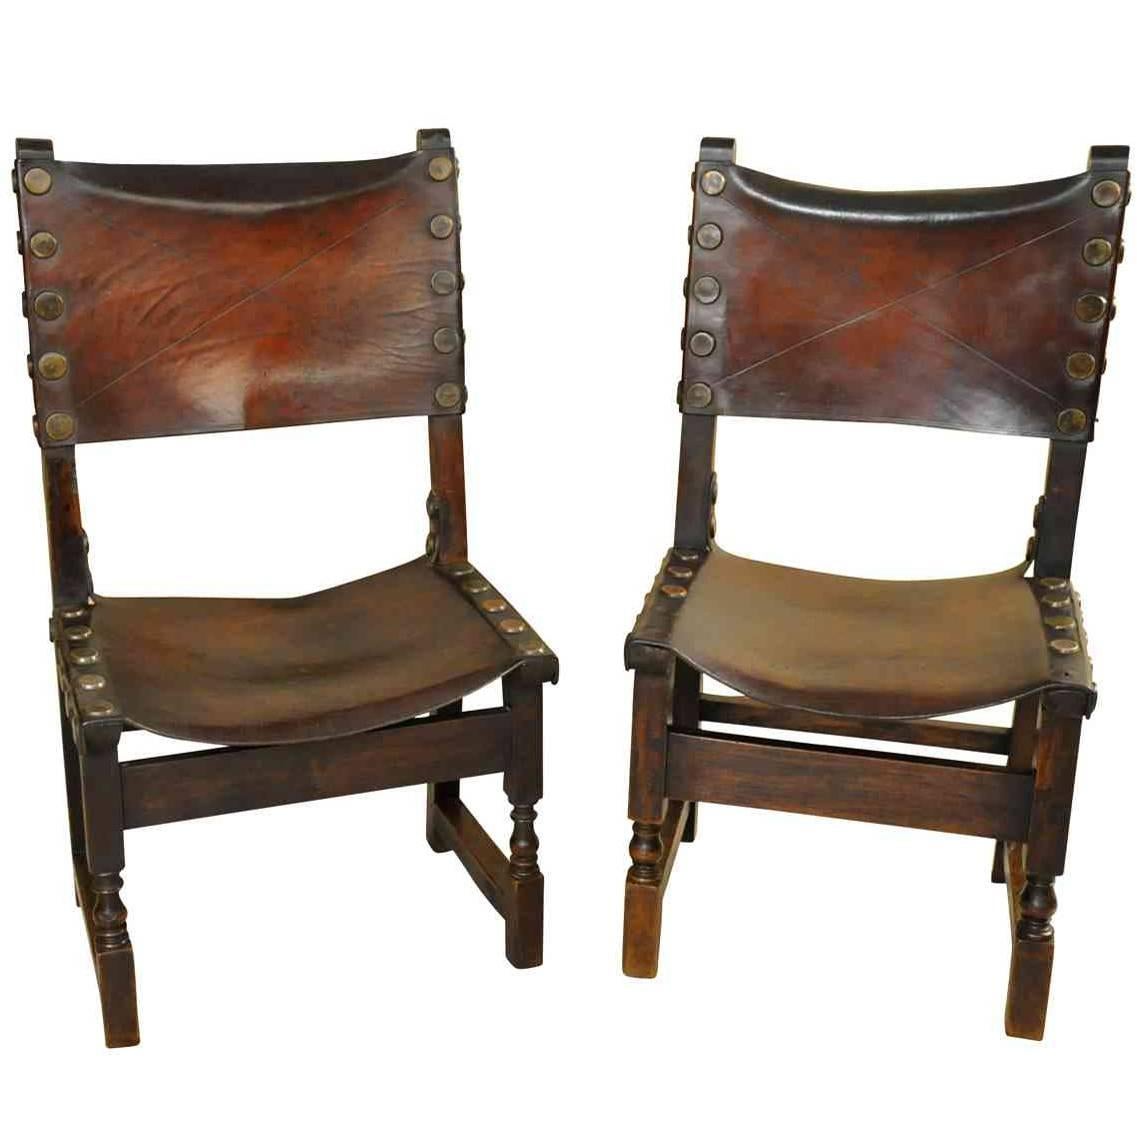 Pair of 17th Century Spanish Leather Chairs